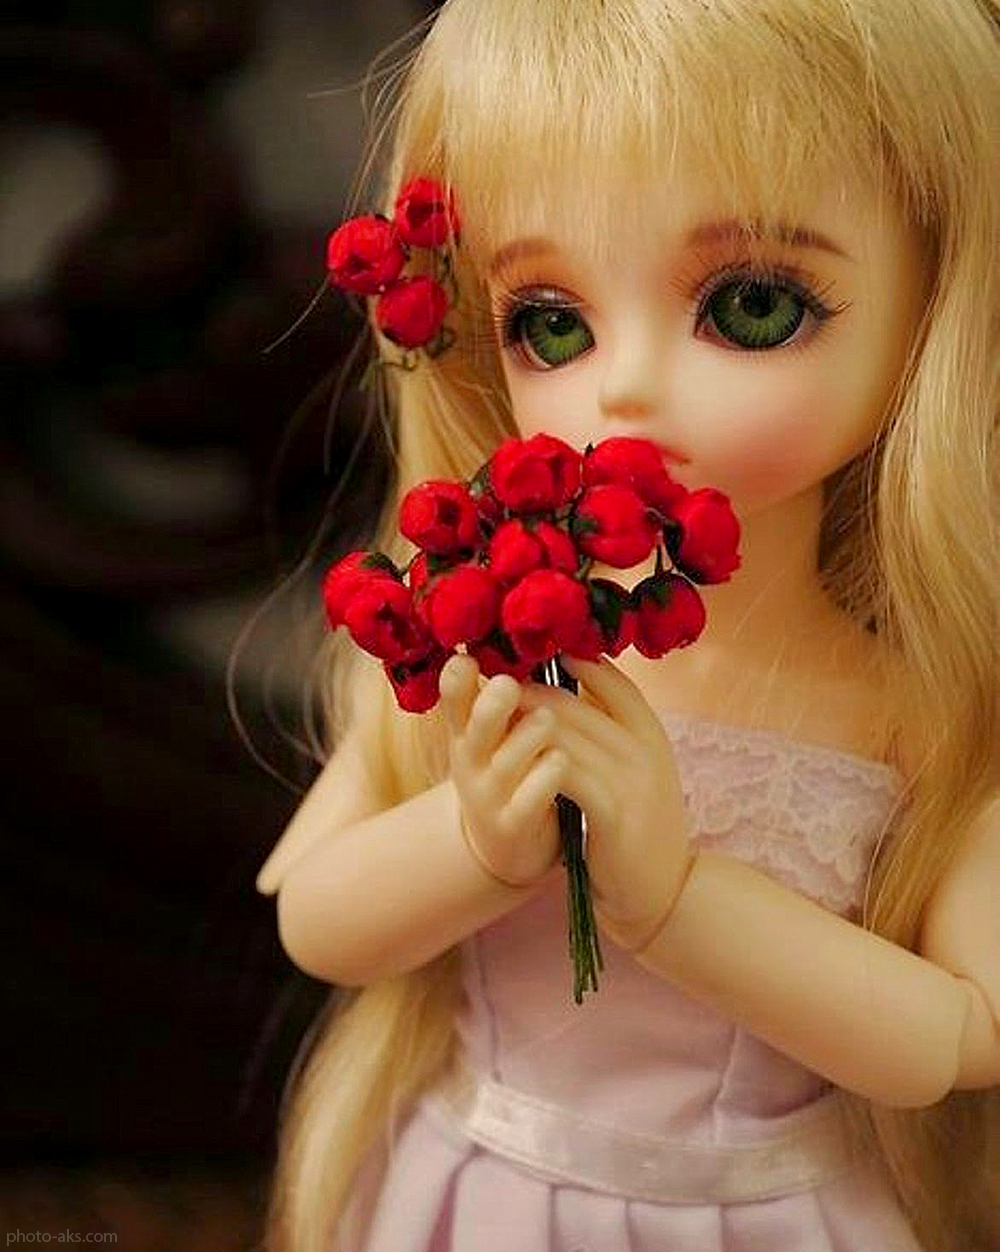 Baby-Doll-With-Flowers.jpg